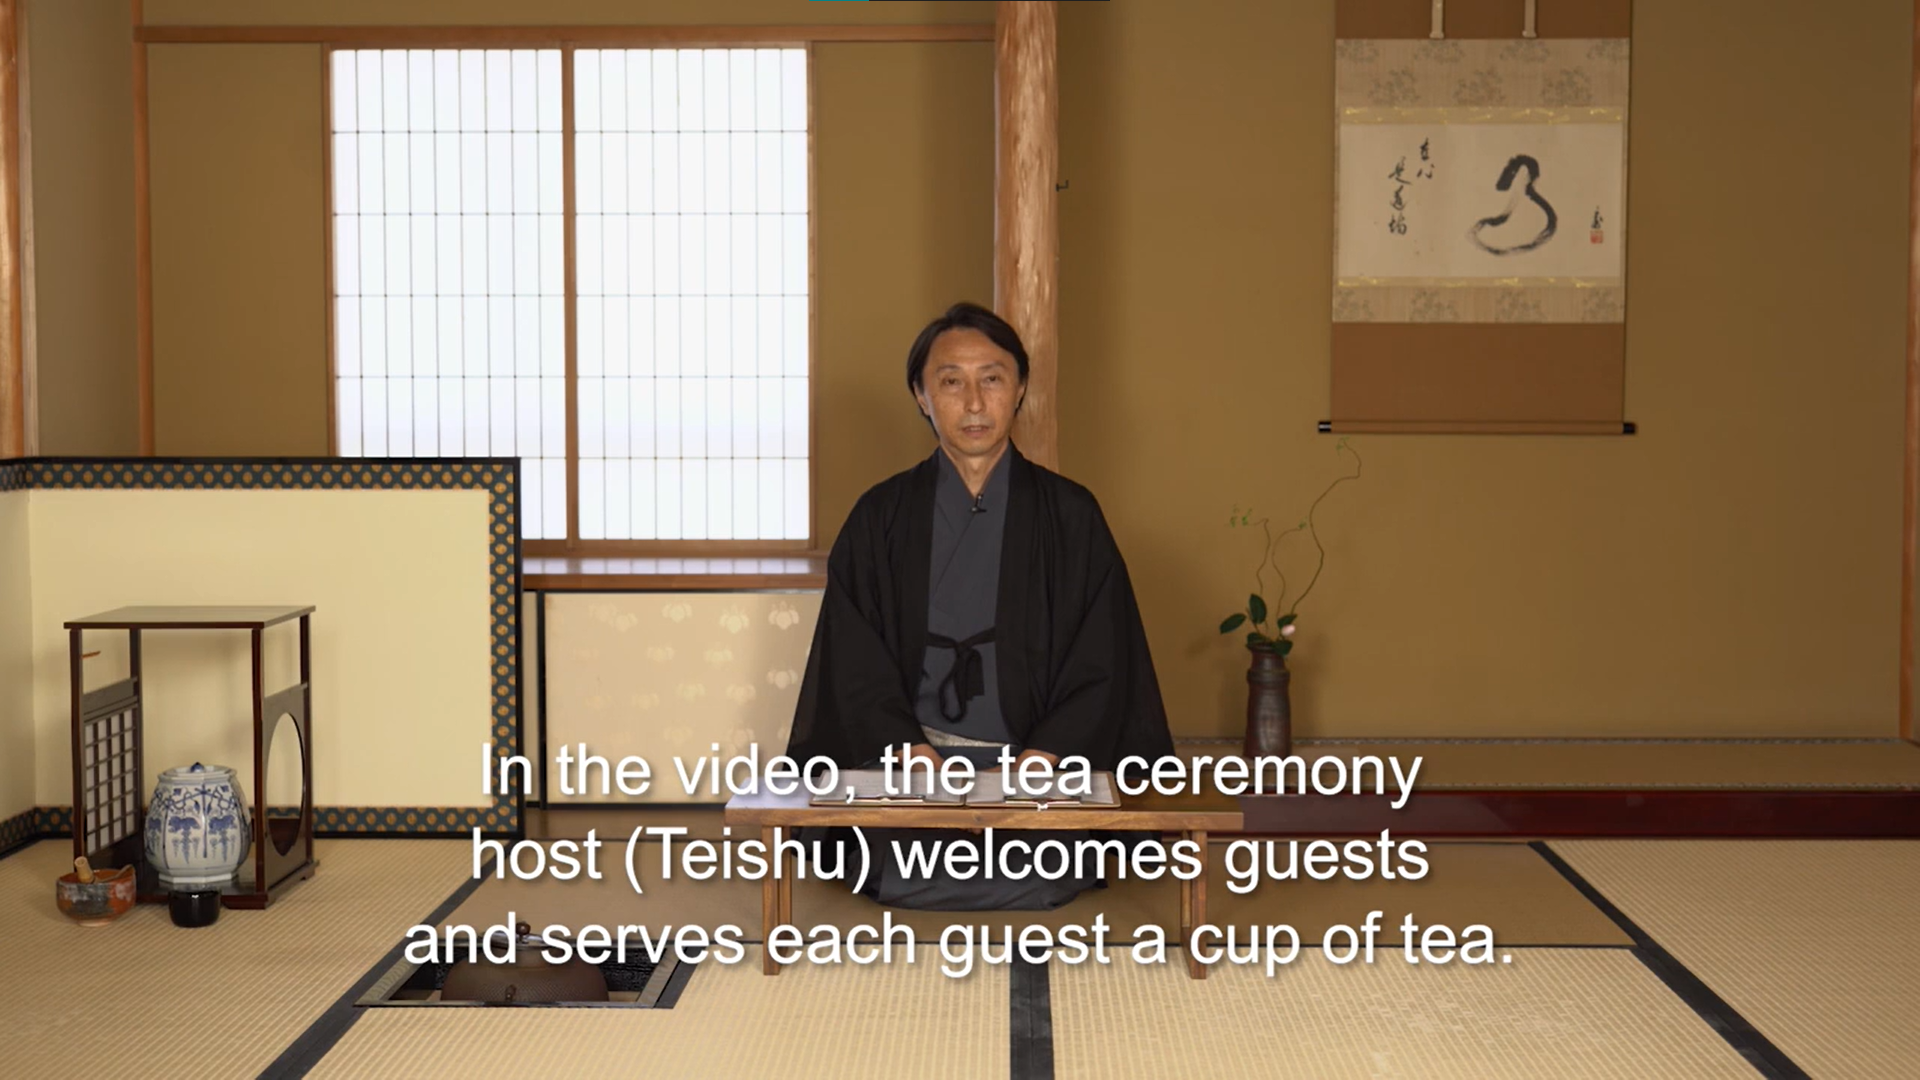 Instructor Hitoshi Murata introduces the Way of Tea